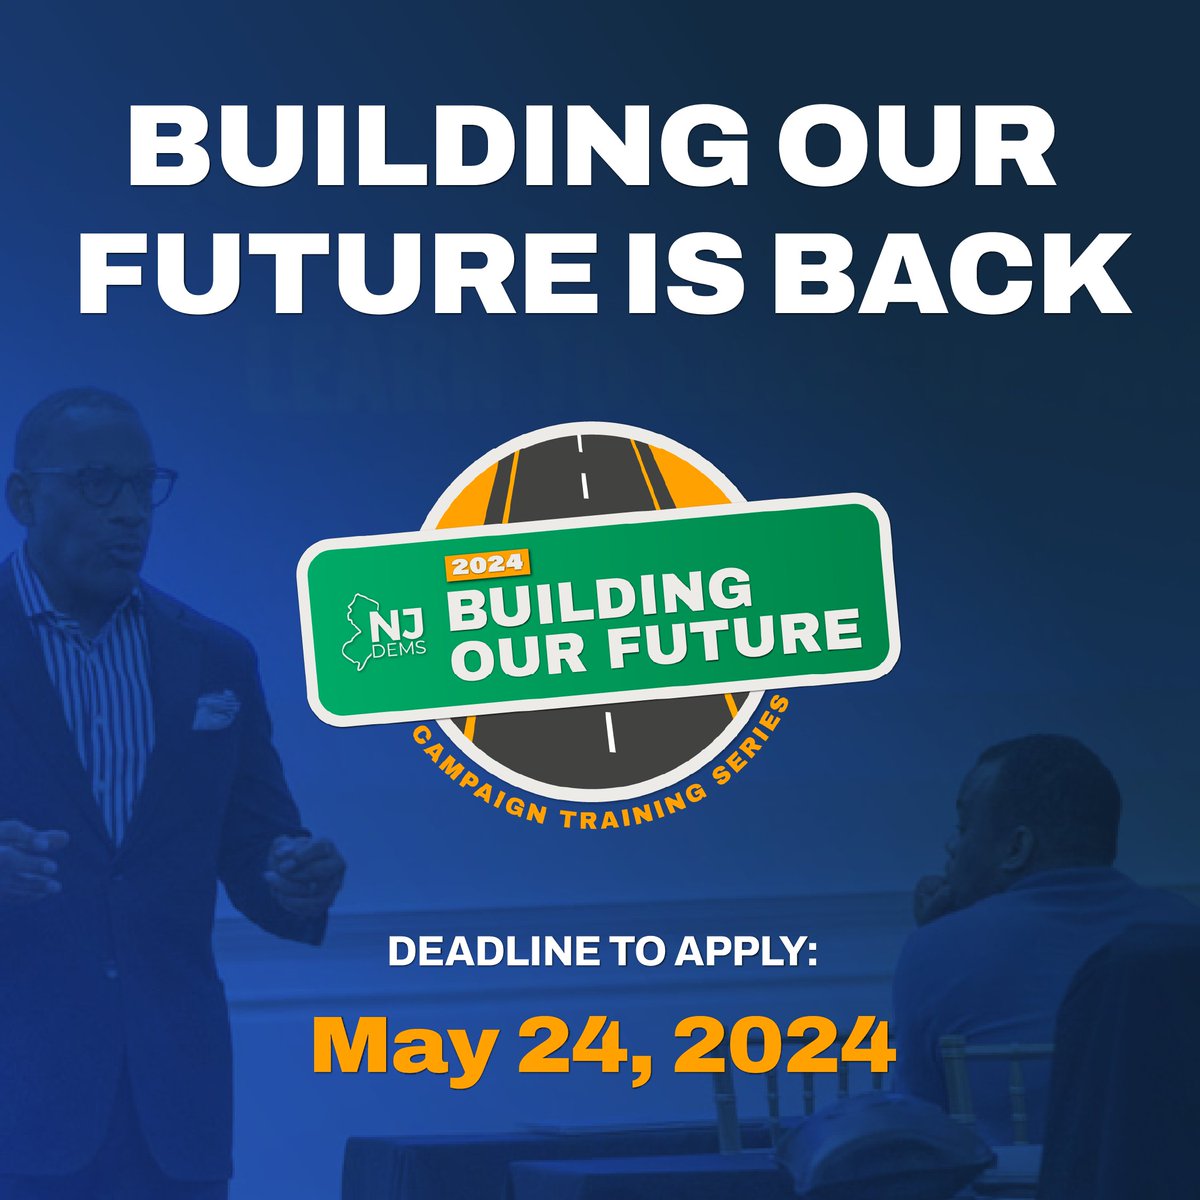 NJ Dems' Building Our Future program is back to help train future Democratic candidates and political operatives in 2024! Applications close soon and spots are limited. Apply here: secure.ngpvan.com/tRbGOvzdL0ipcq…